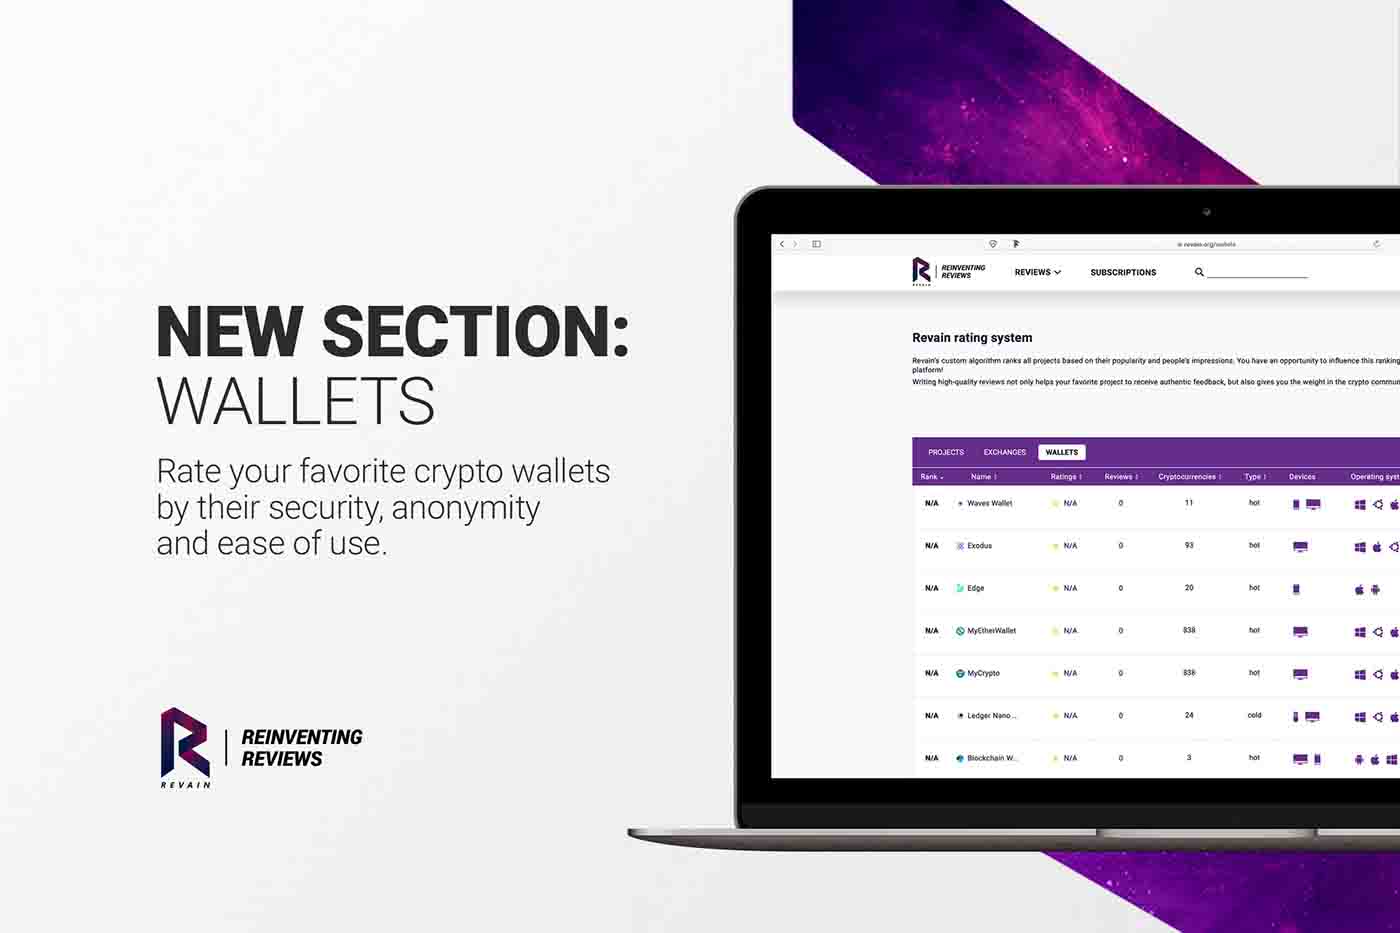 Crypto Wallets category is now available on Revain platform